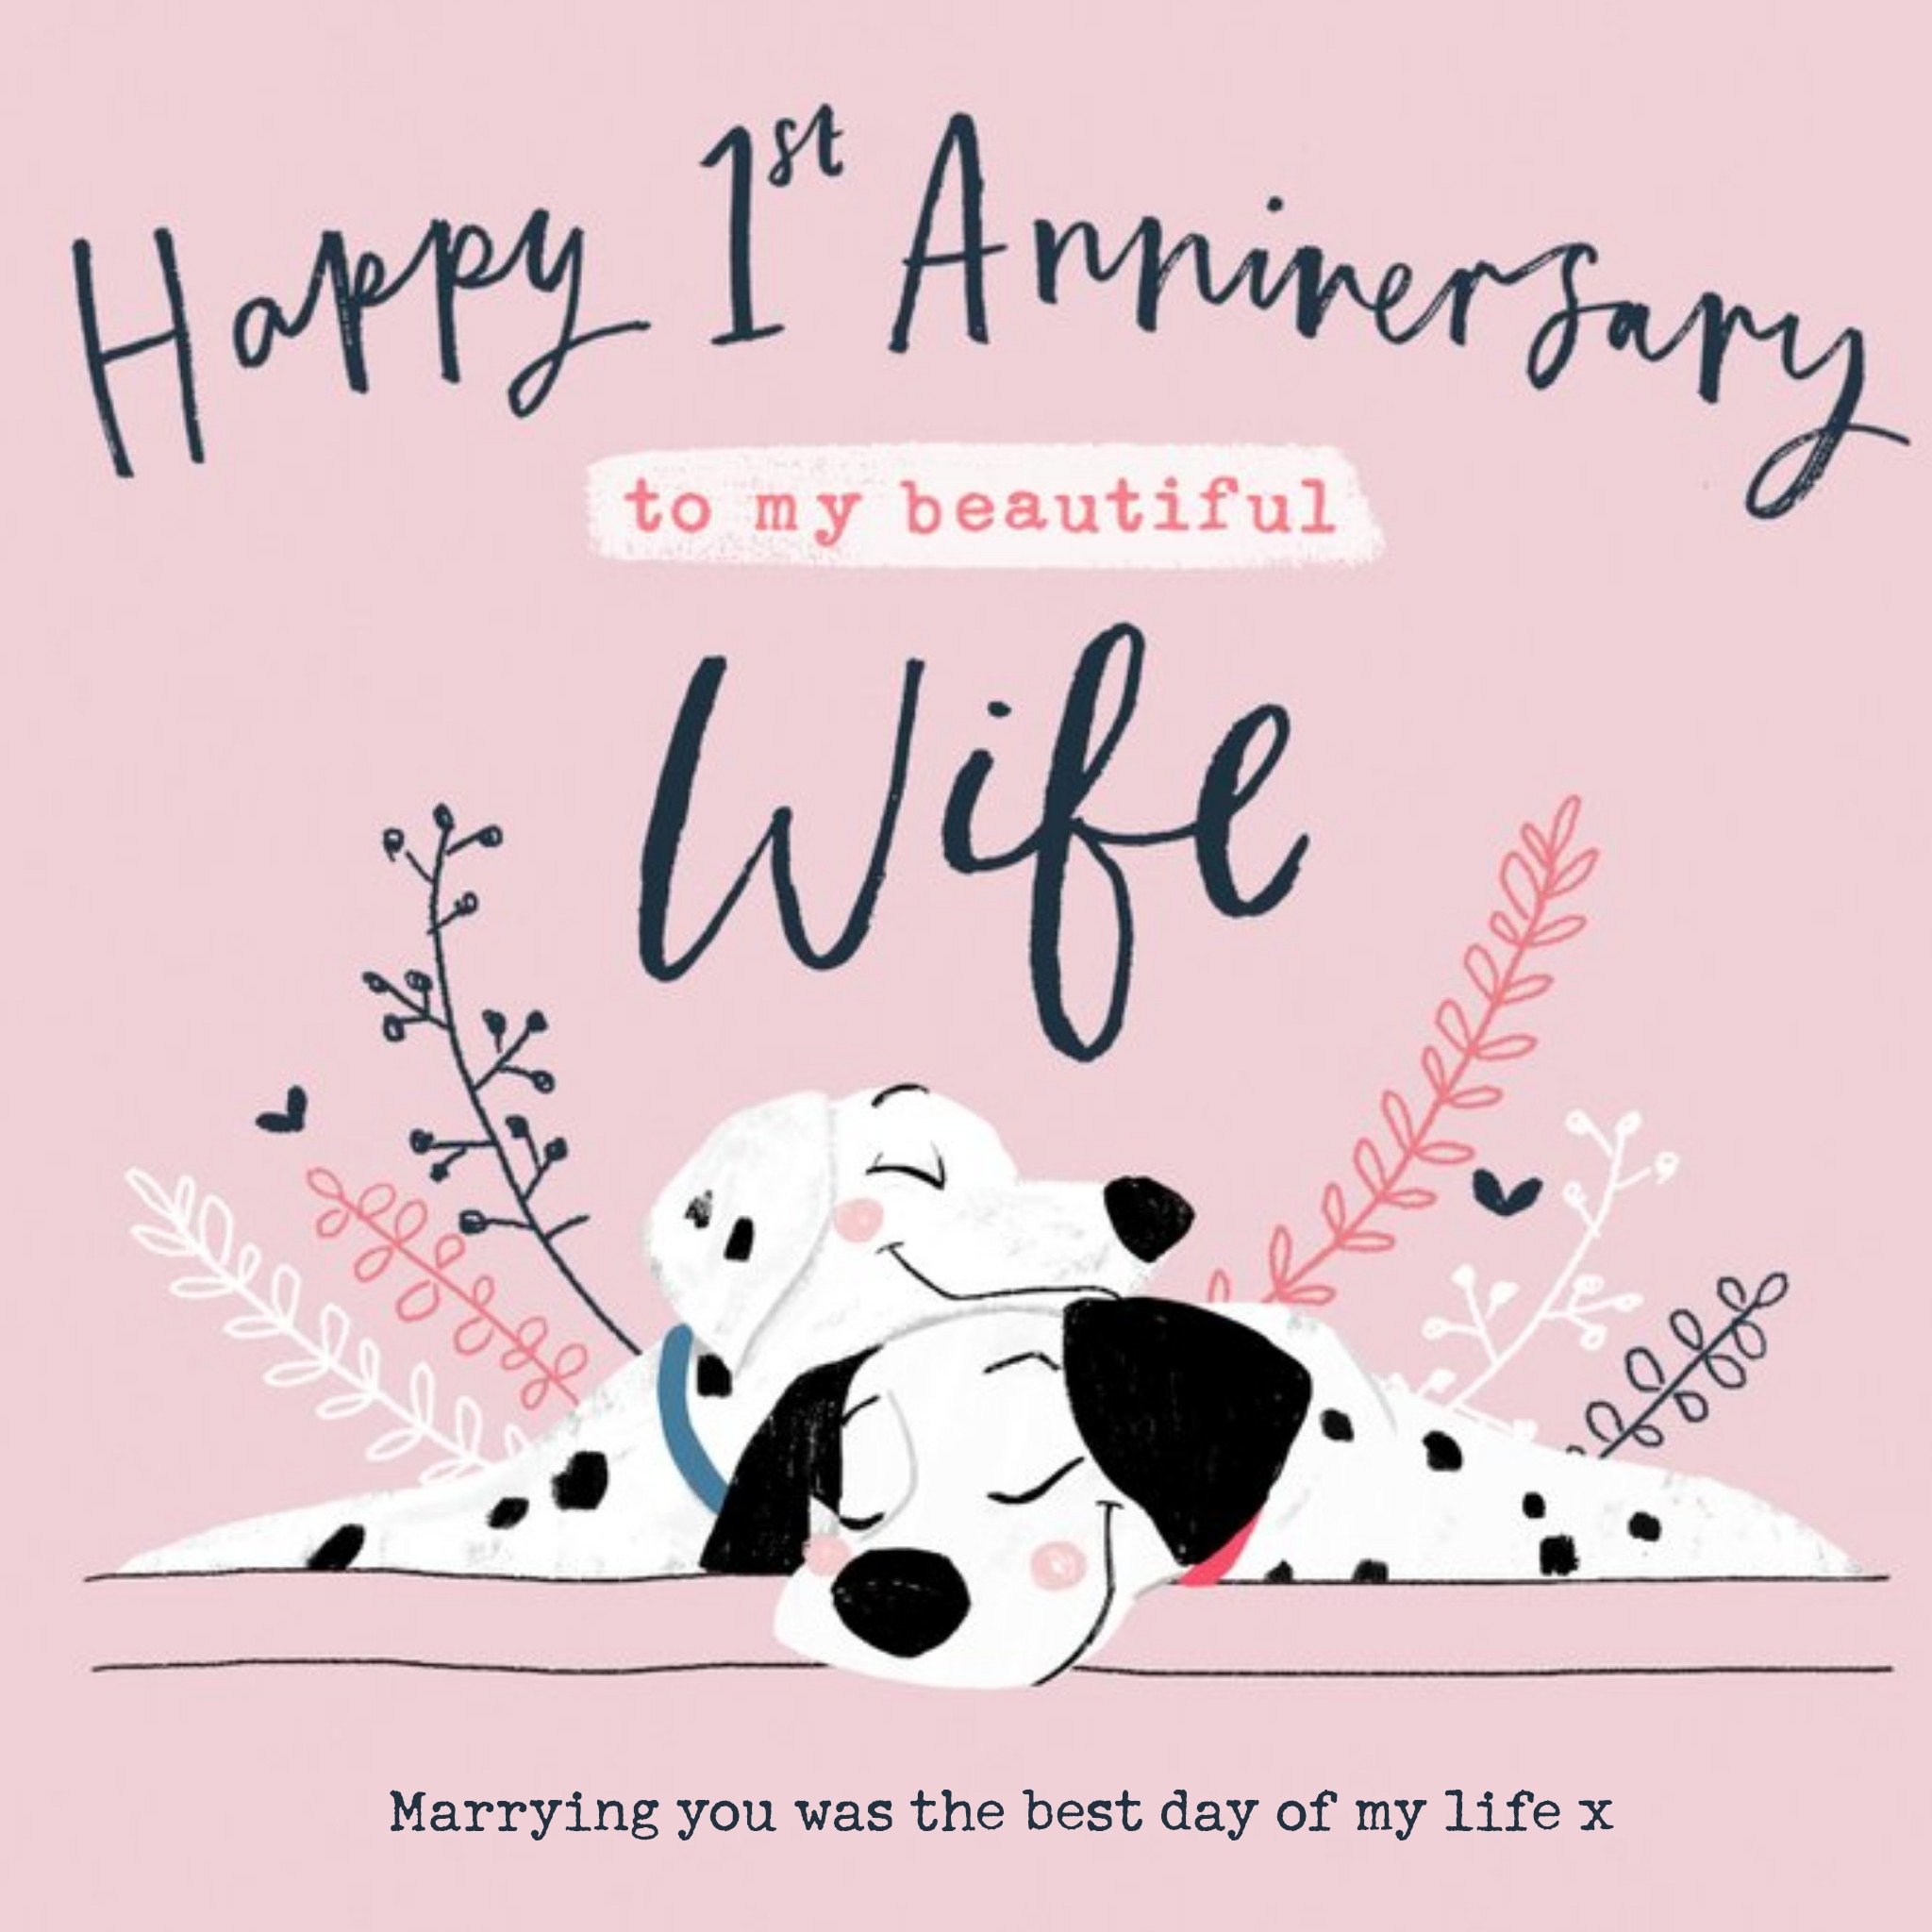 Disney 101 Dalmatians 1st Anniversary Card For Wife, Large